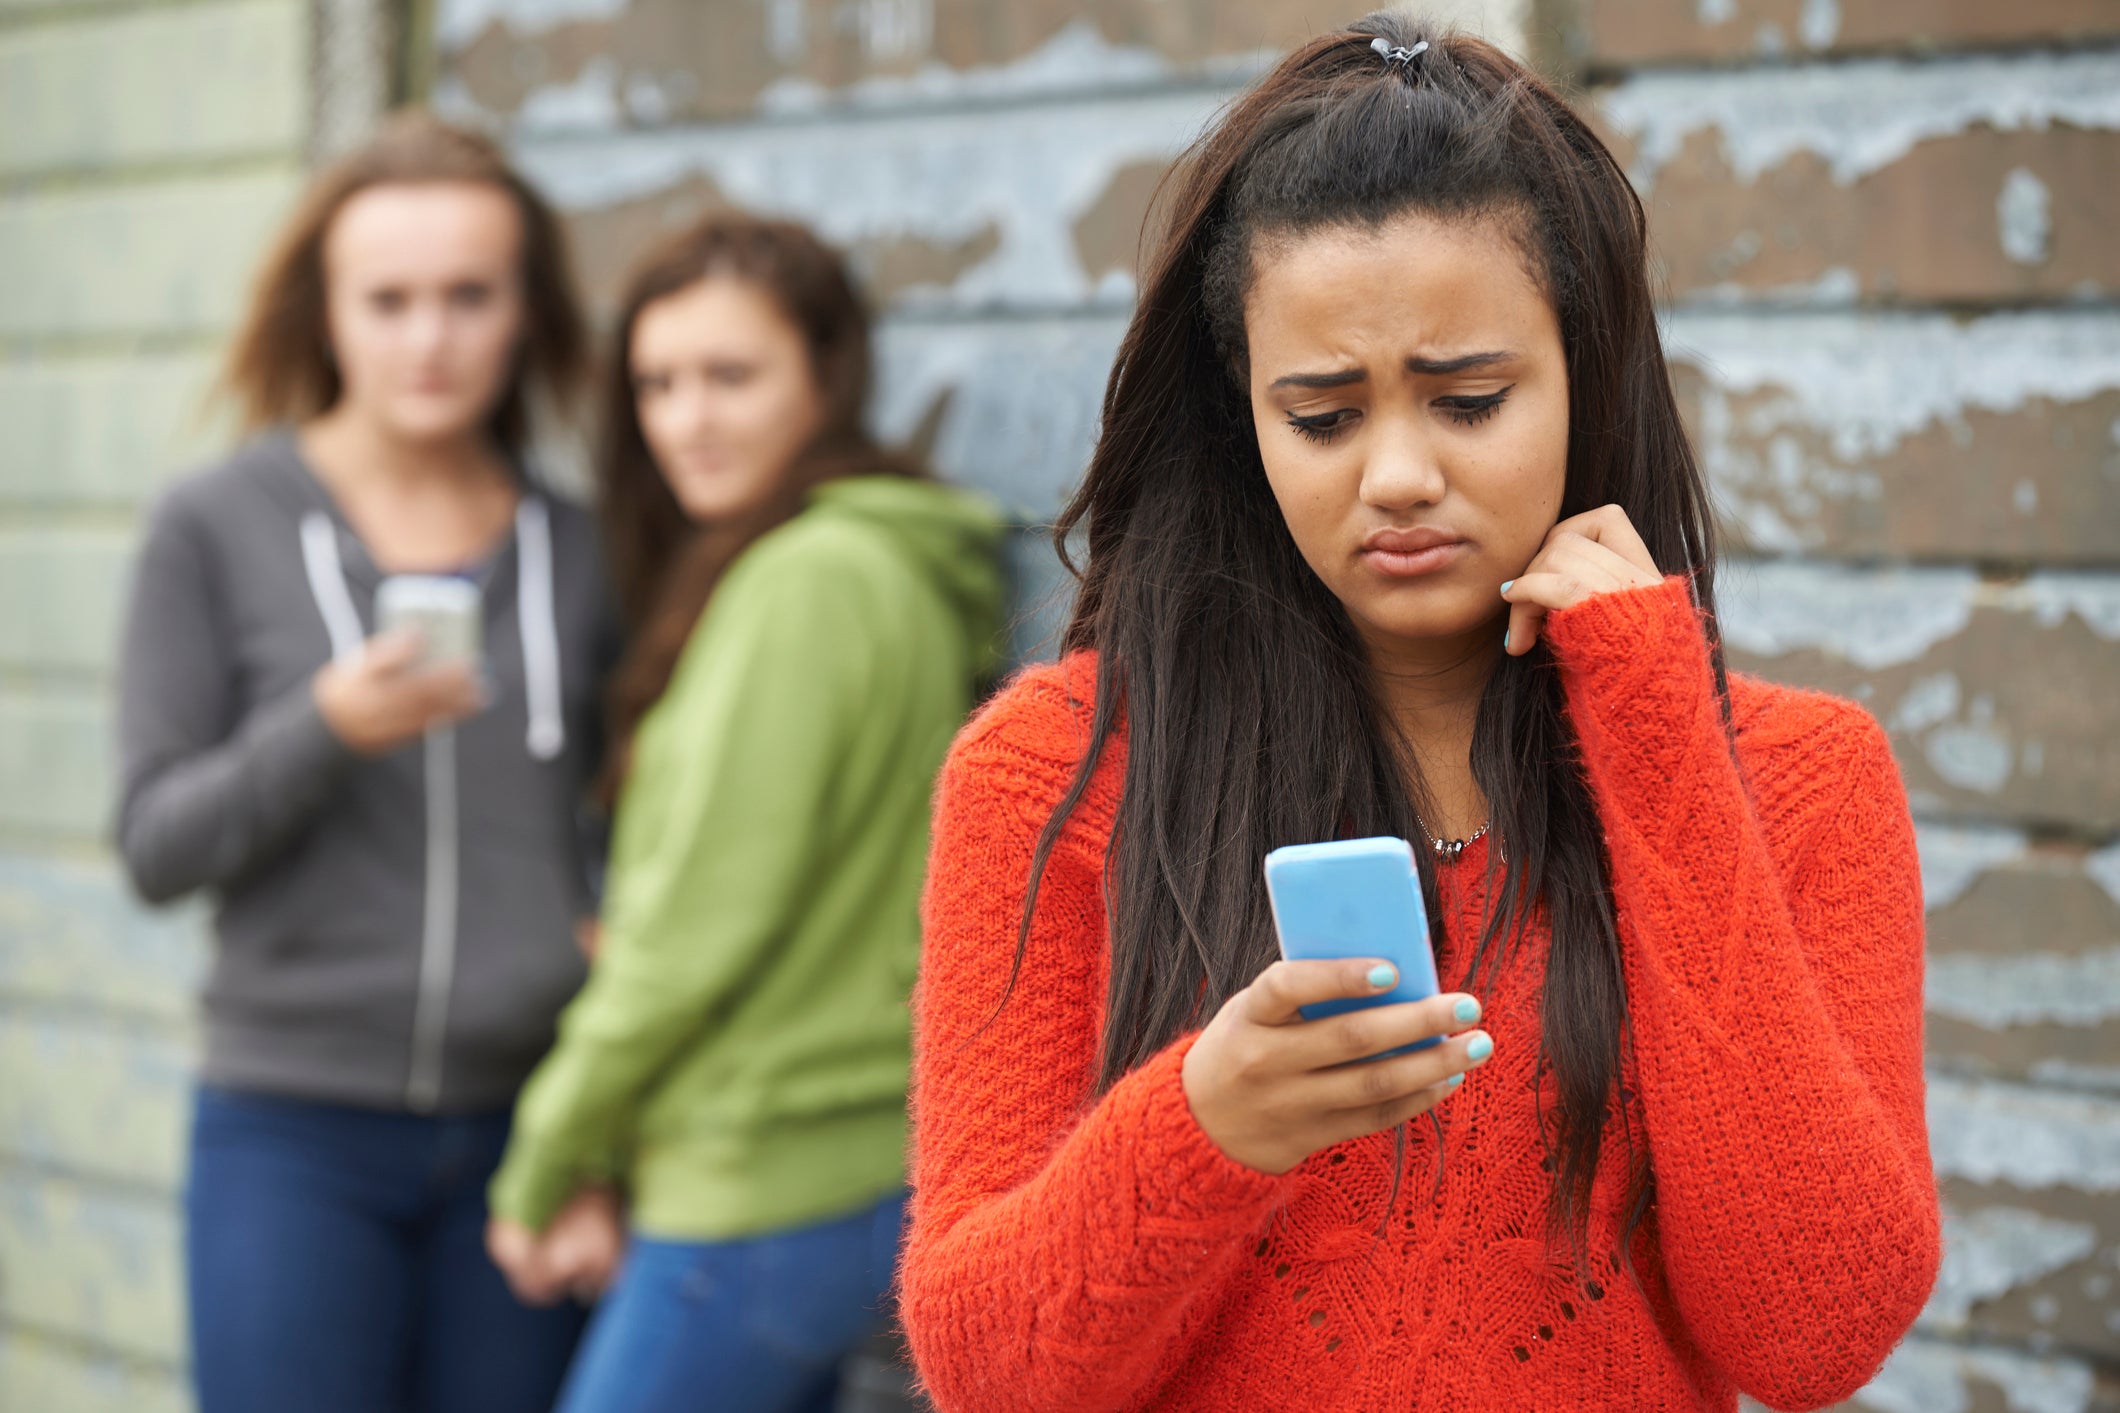 A teen girl looking sad at her phone because of cyberbullying.